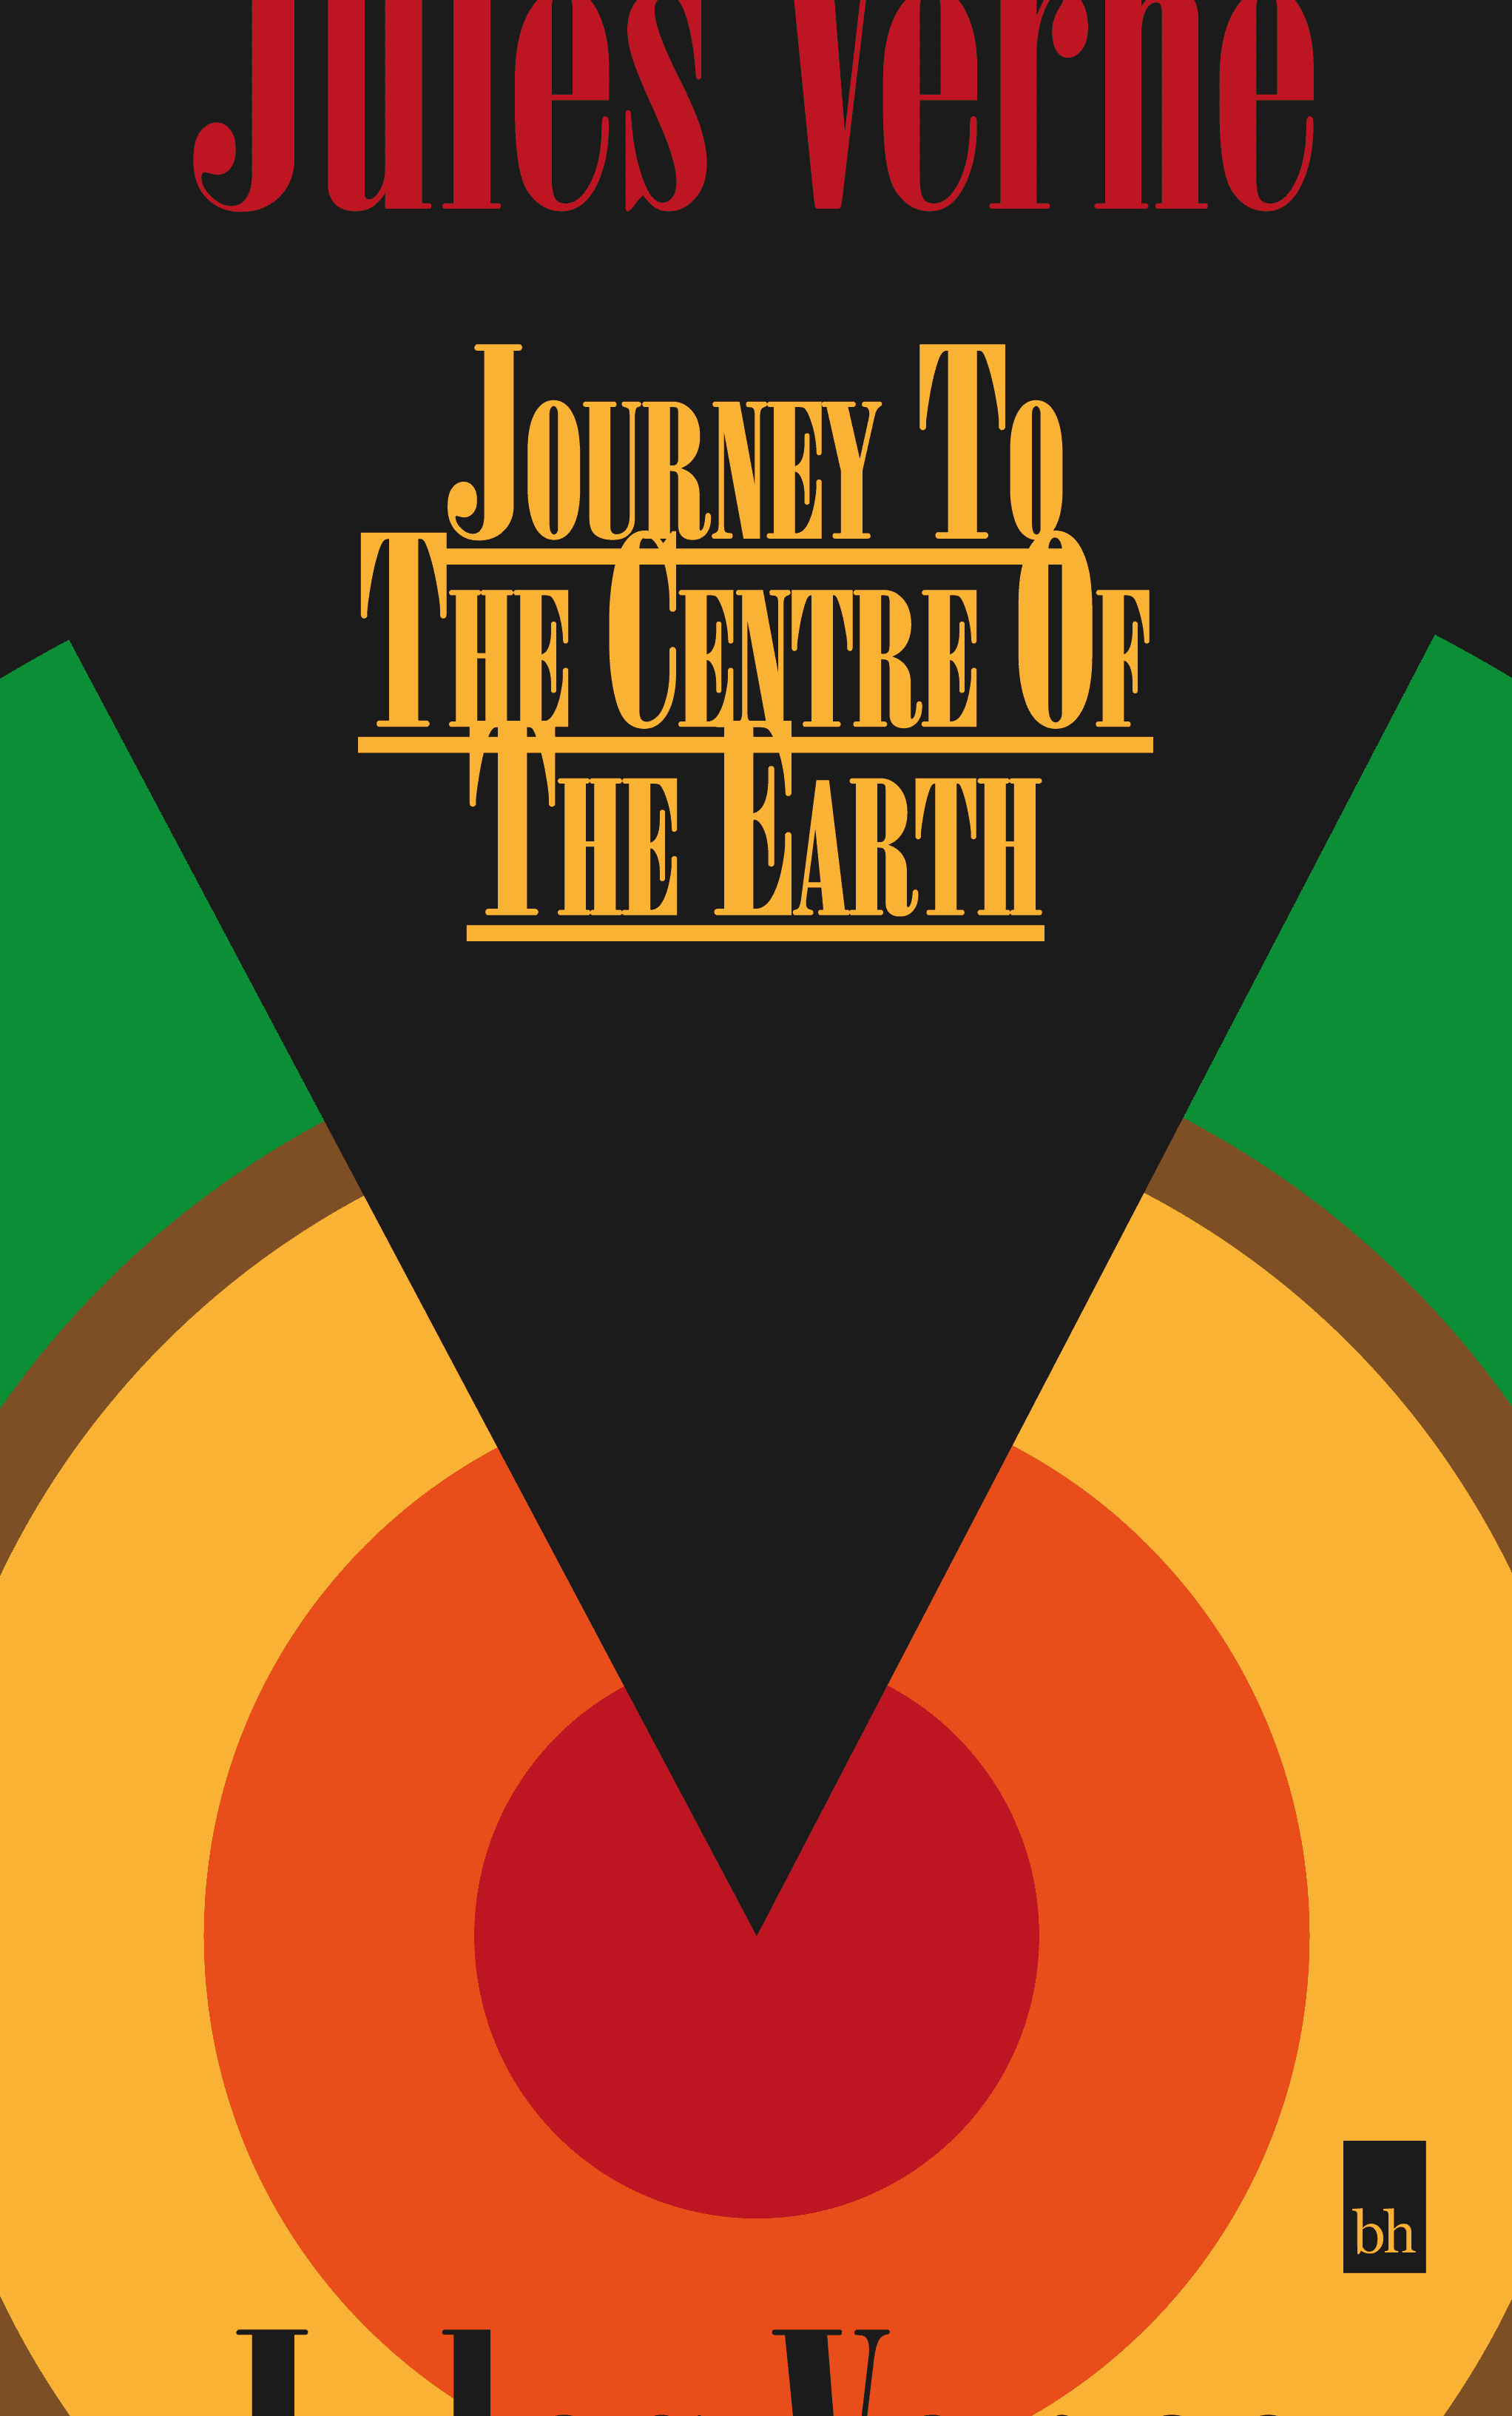 Journey To The Centre of The Earth by Jules Verne